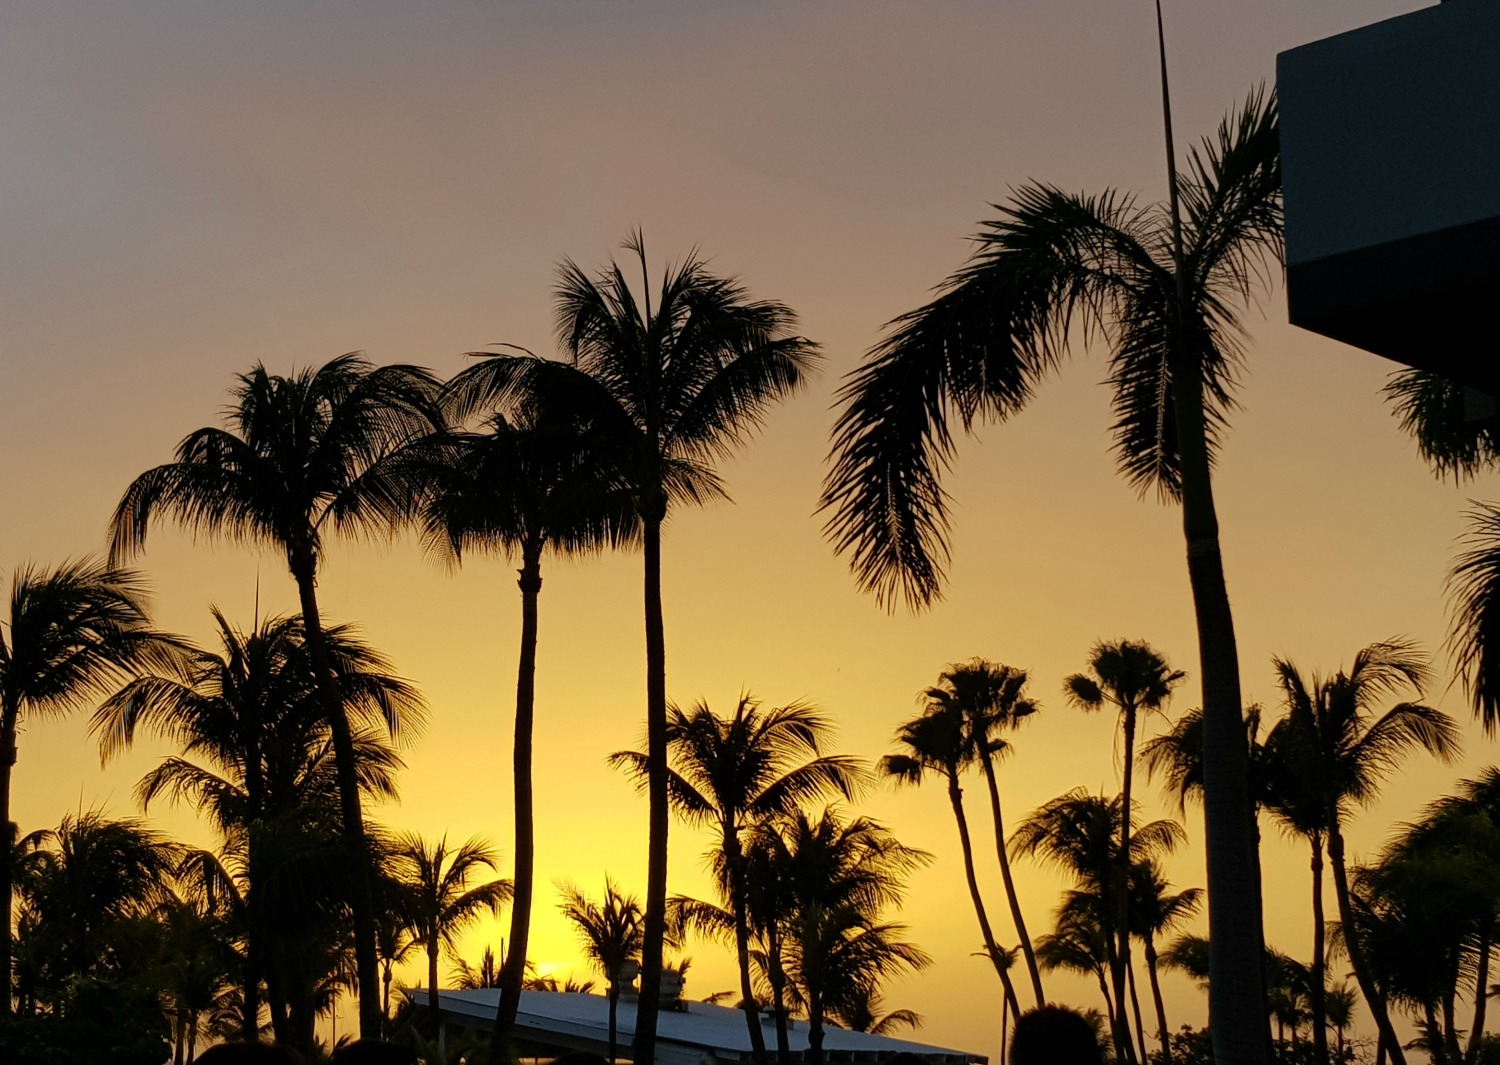 The sun setting behind silhouetted palm trees as seen from Sunset Grille restaurant at the Hilton Aruba